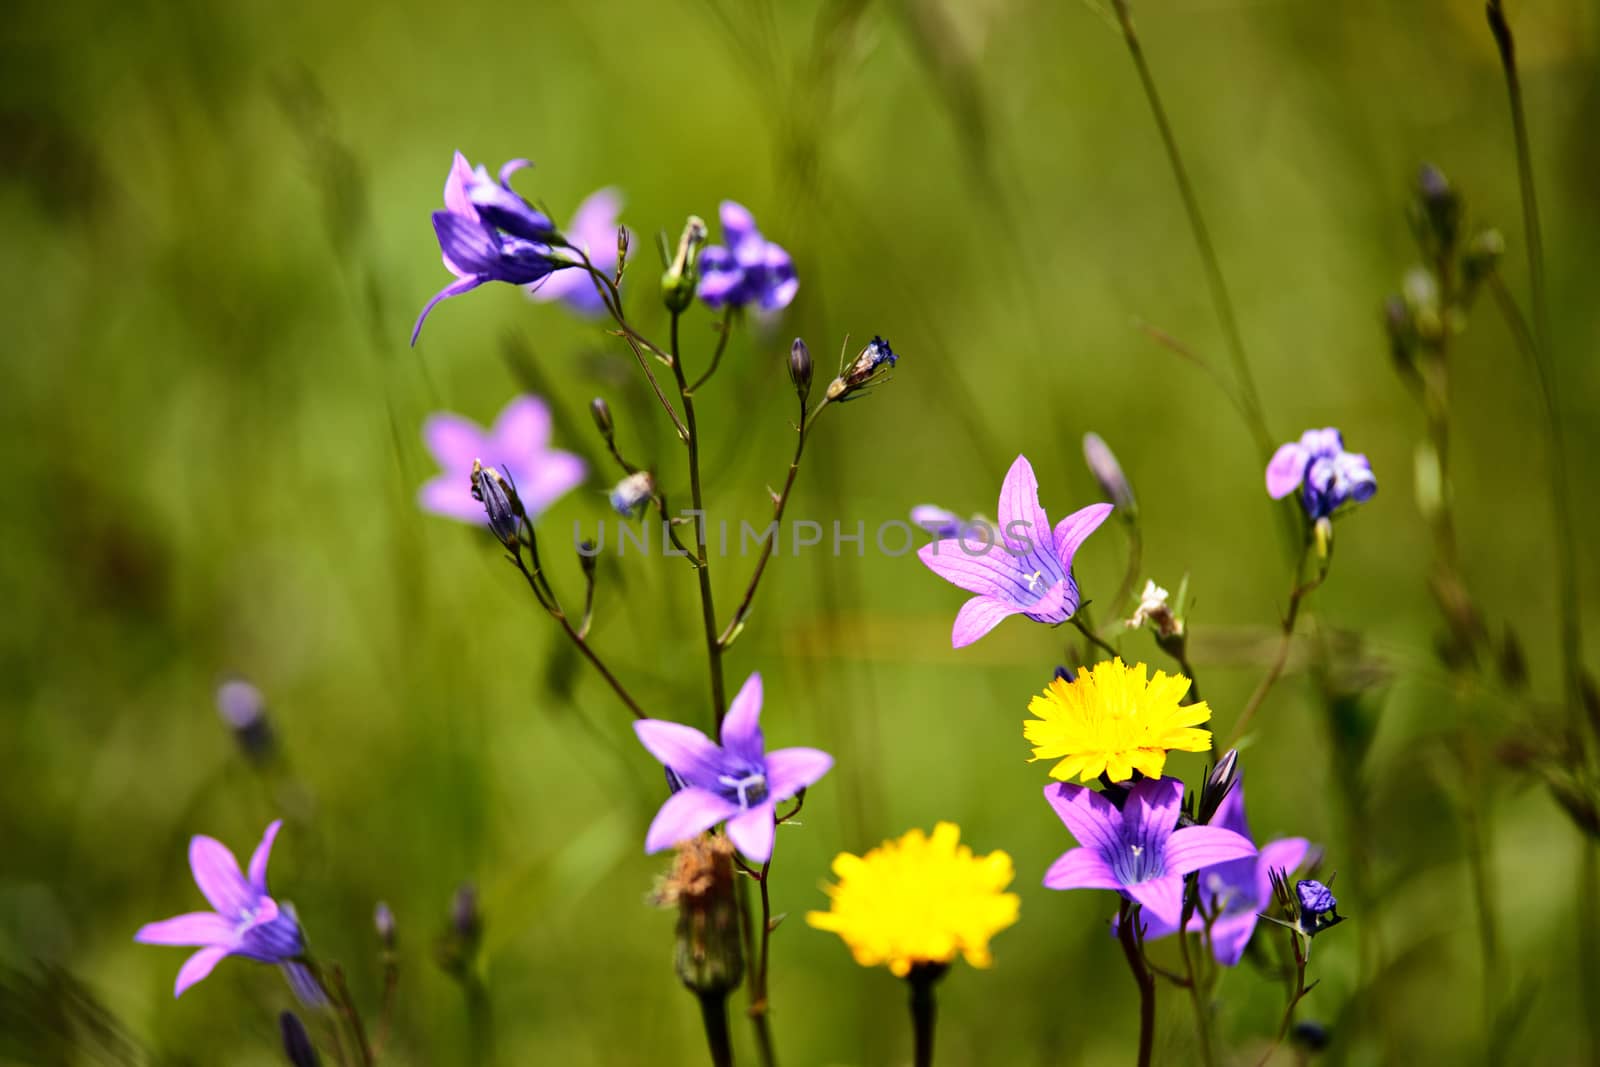 Abundance of blooming wild flowers on the meadow at summertime. Spring flower seasonal nature background